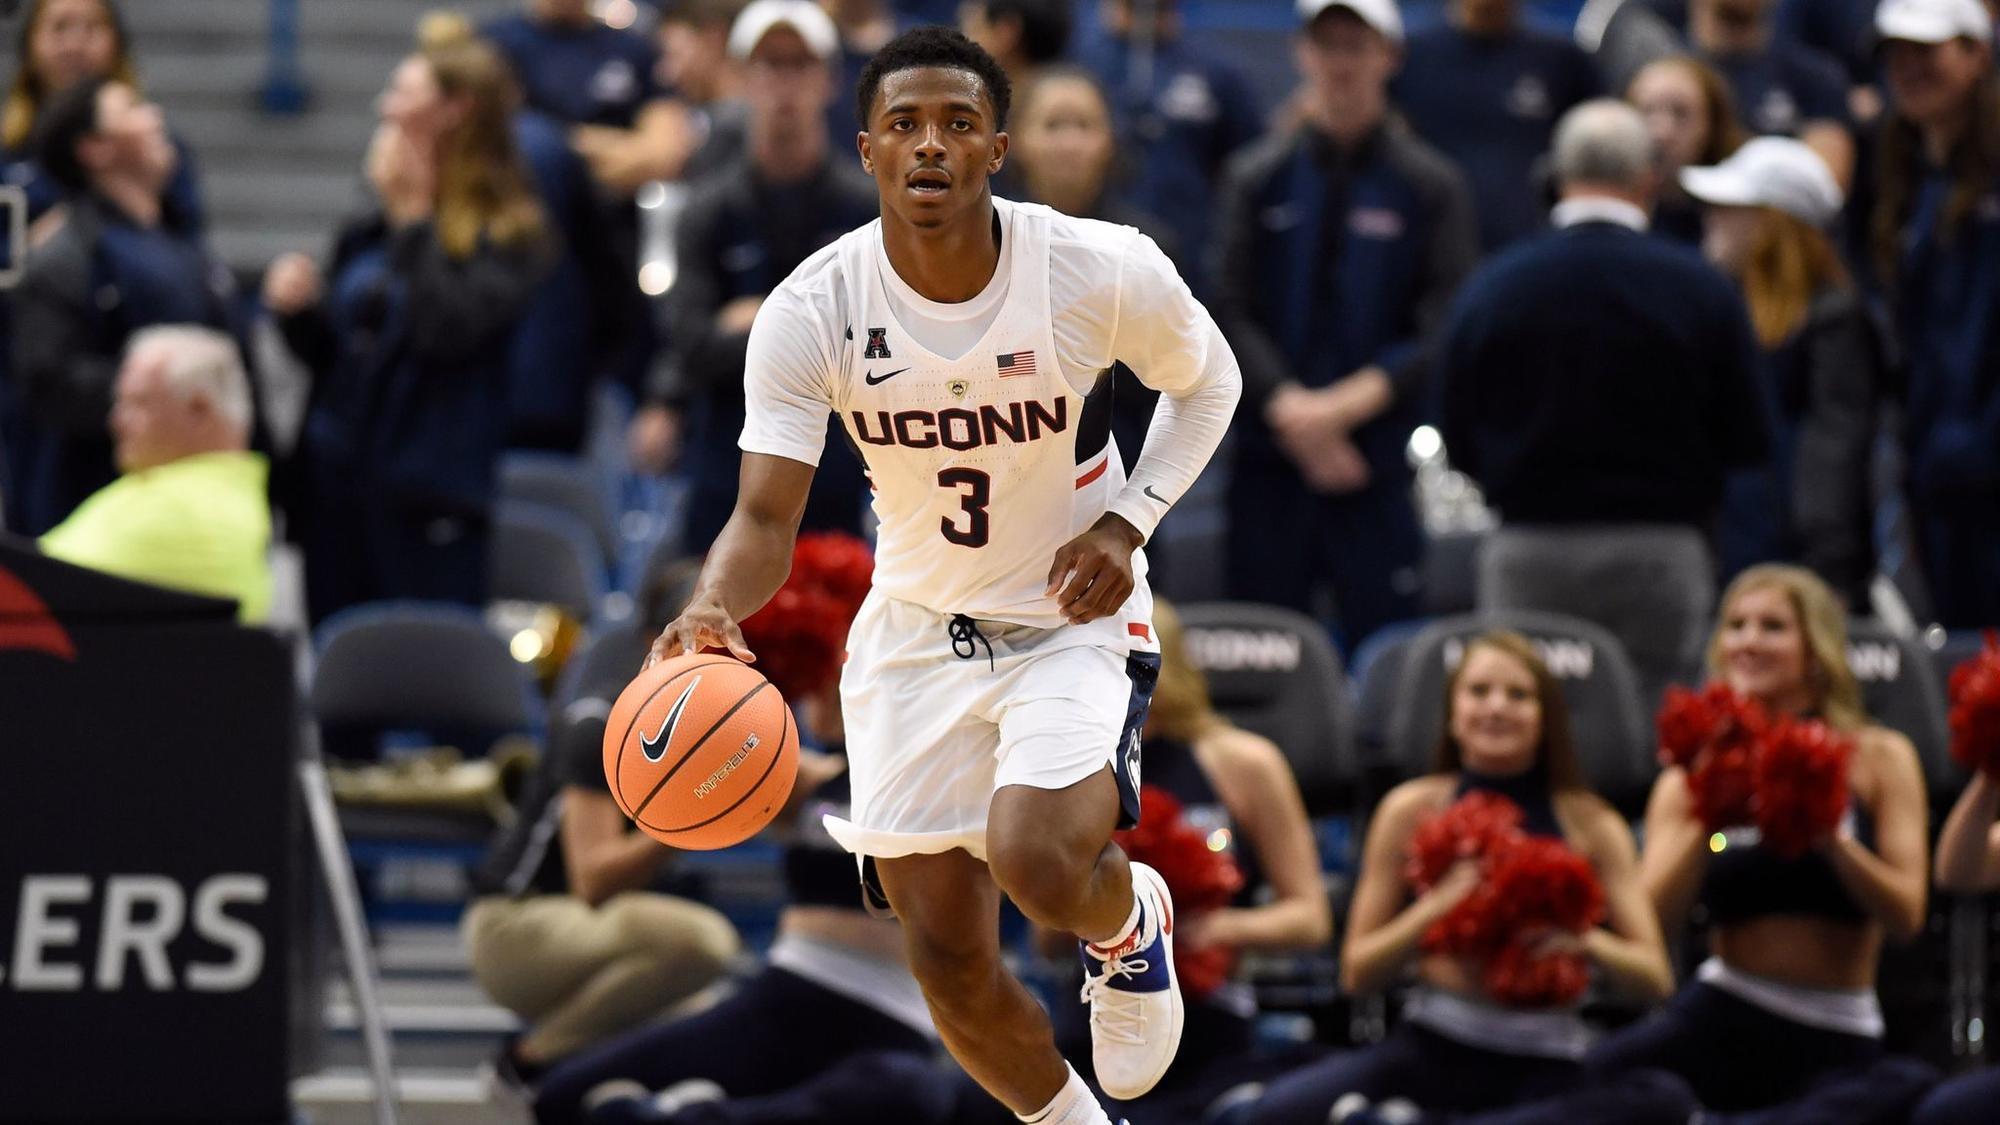 what you need to know about the 2017-18 uconn men's basketball